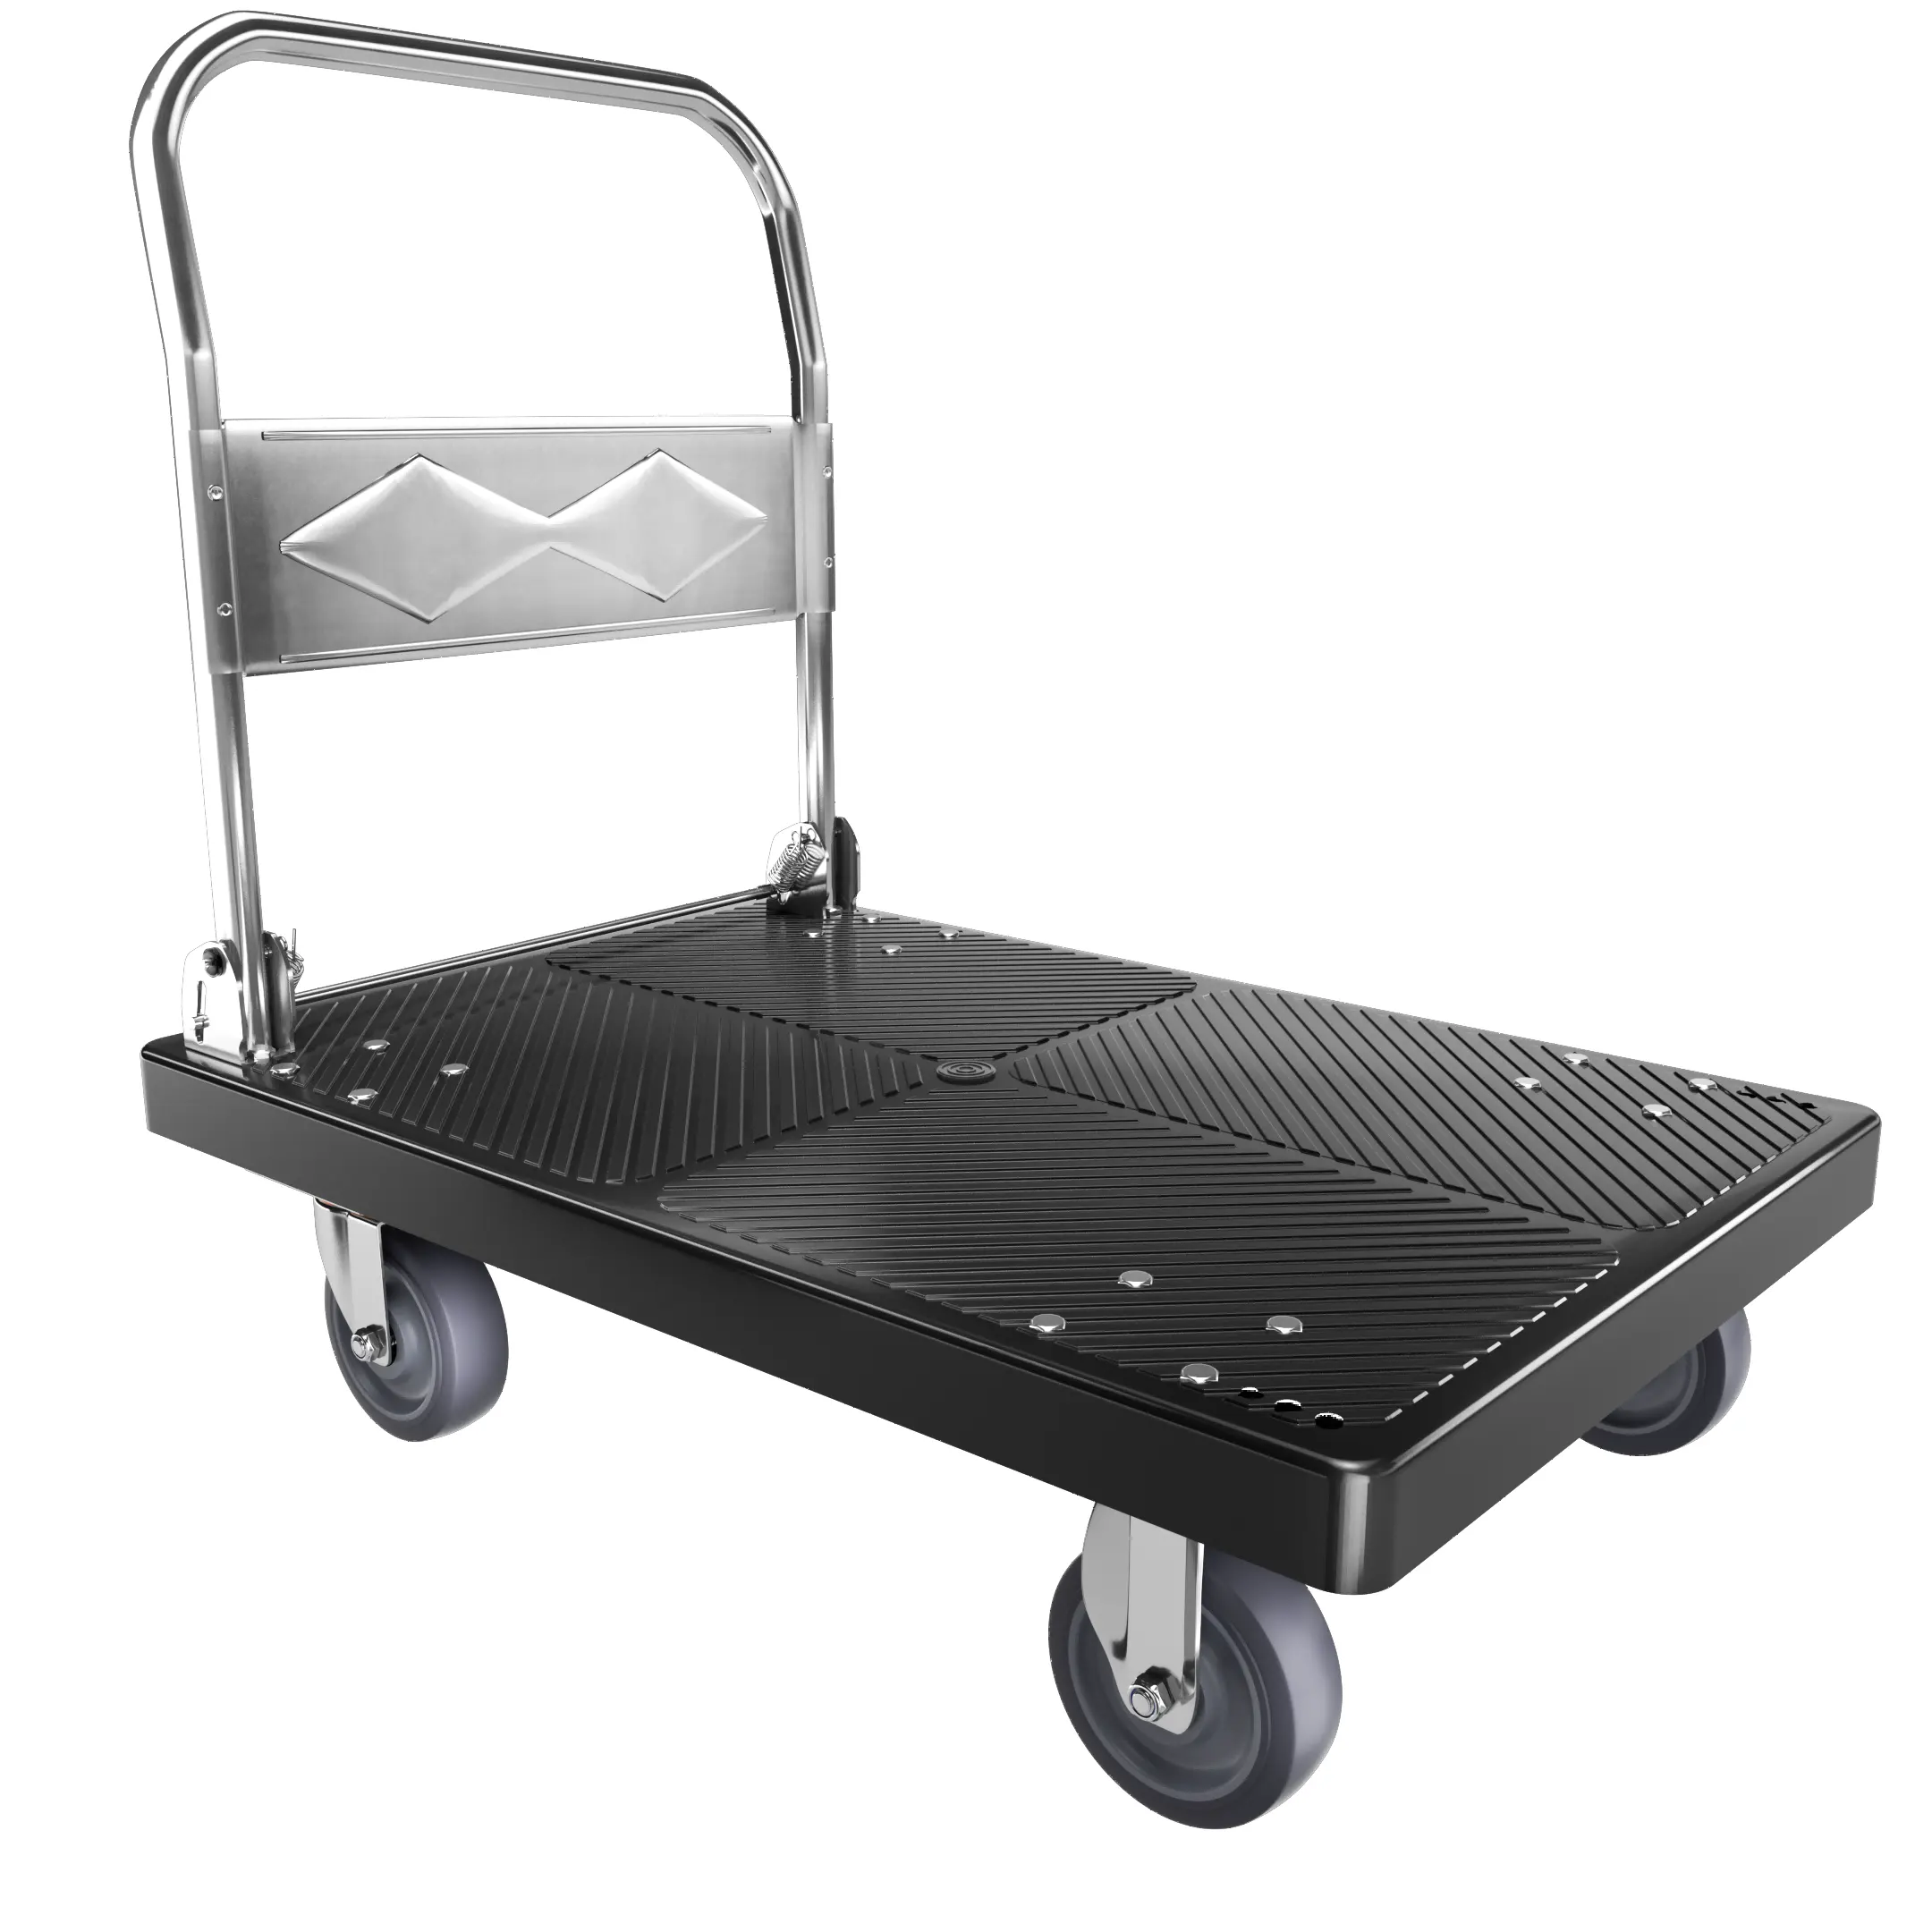 300kg 90*60cm Good Quality Competitive Price Platform Hand Truck hand carts and Hand Trolley with black platform 5in TPR wheel